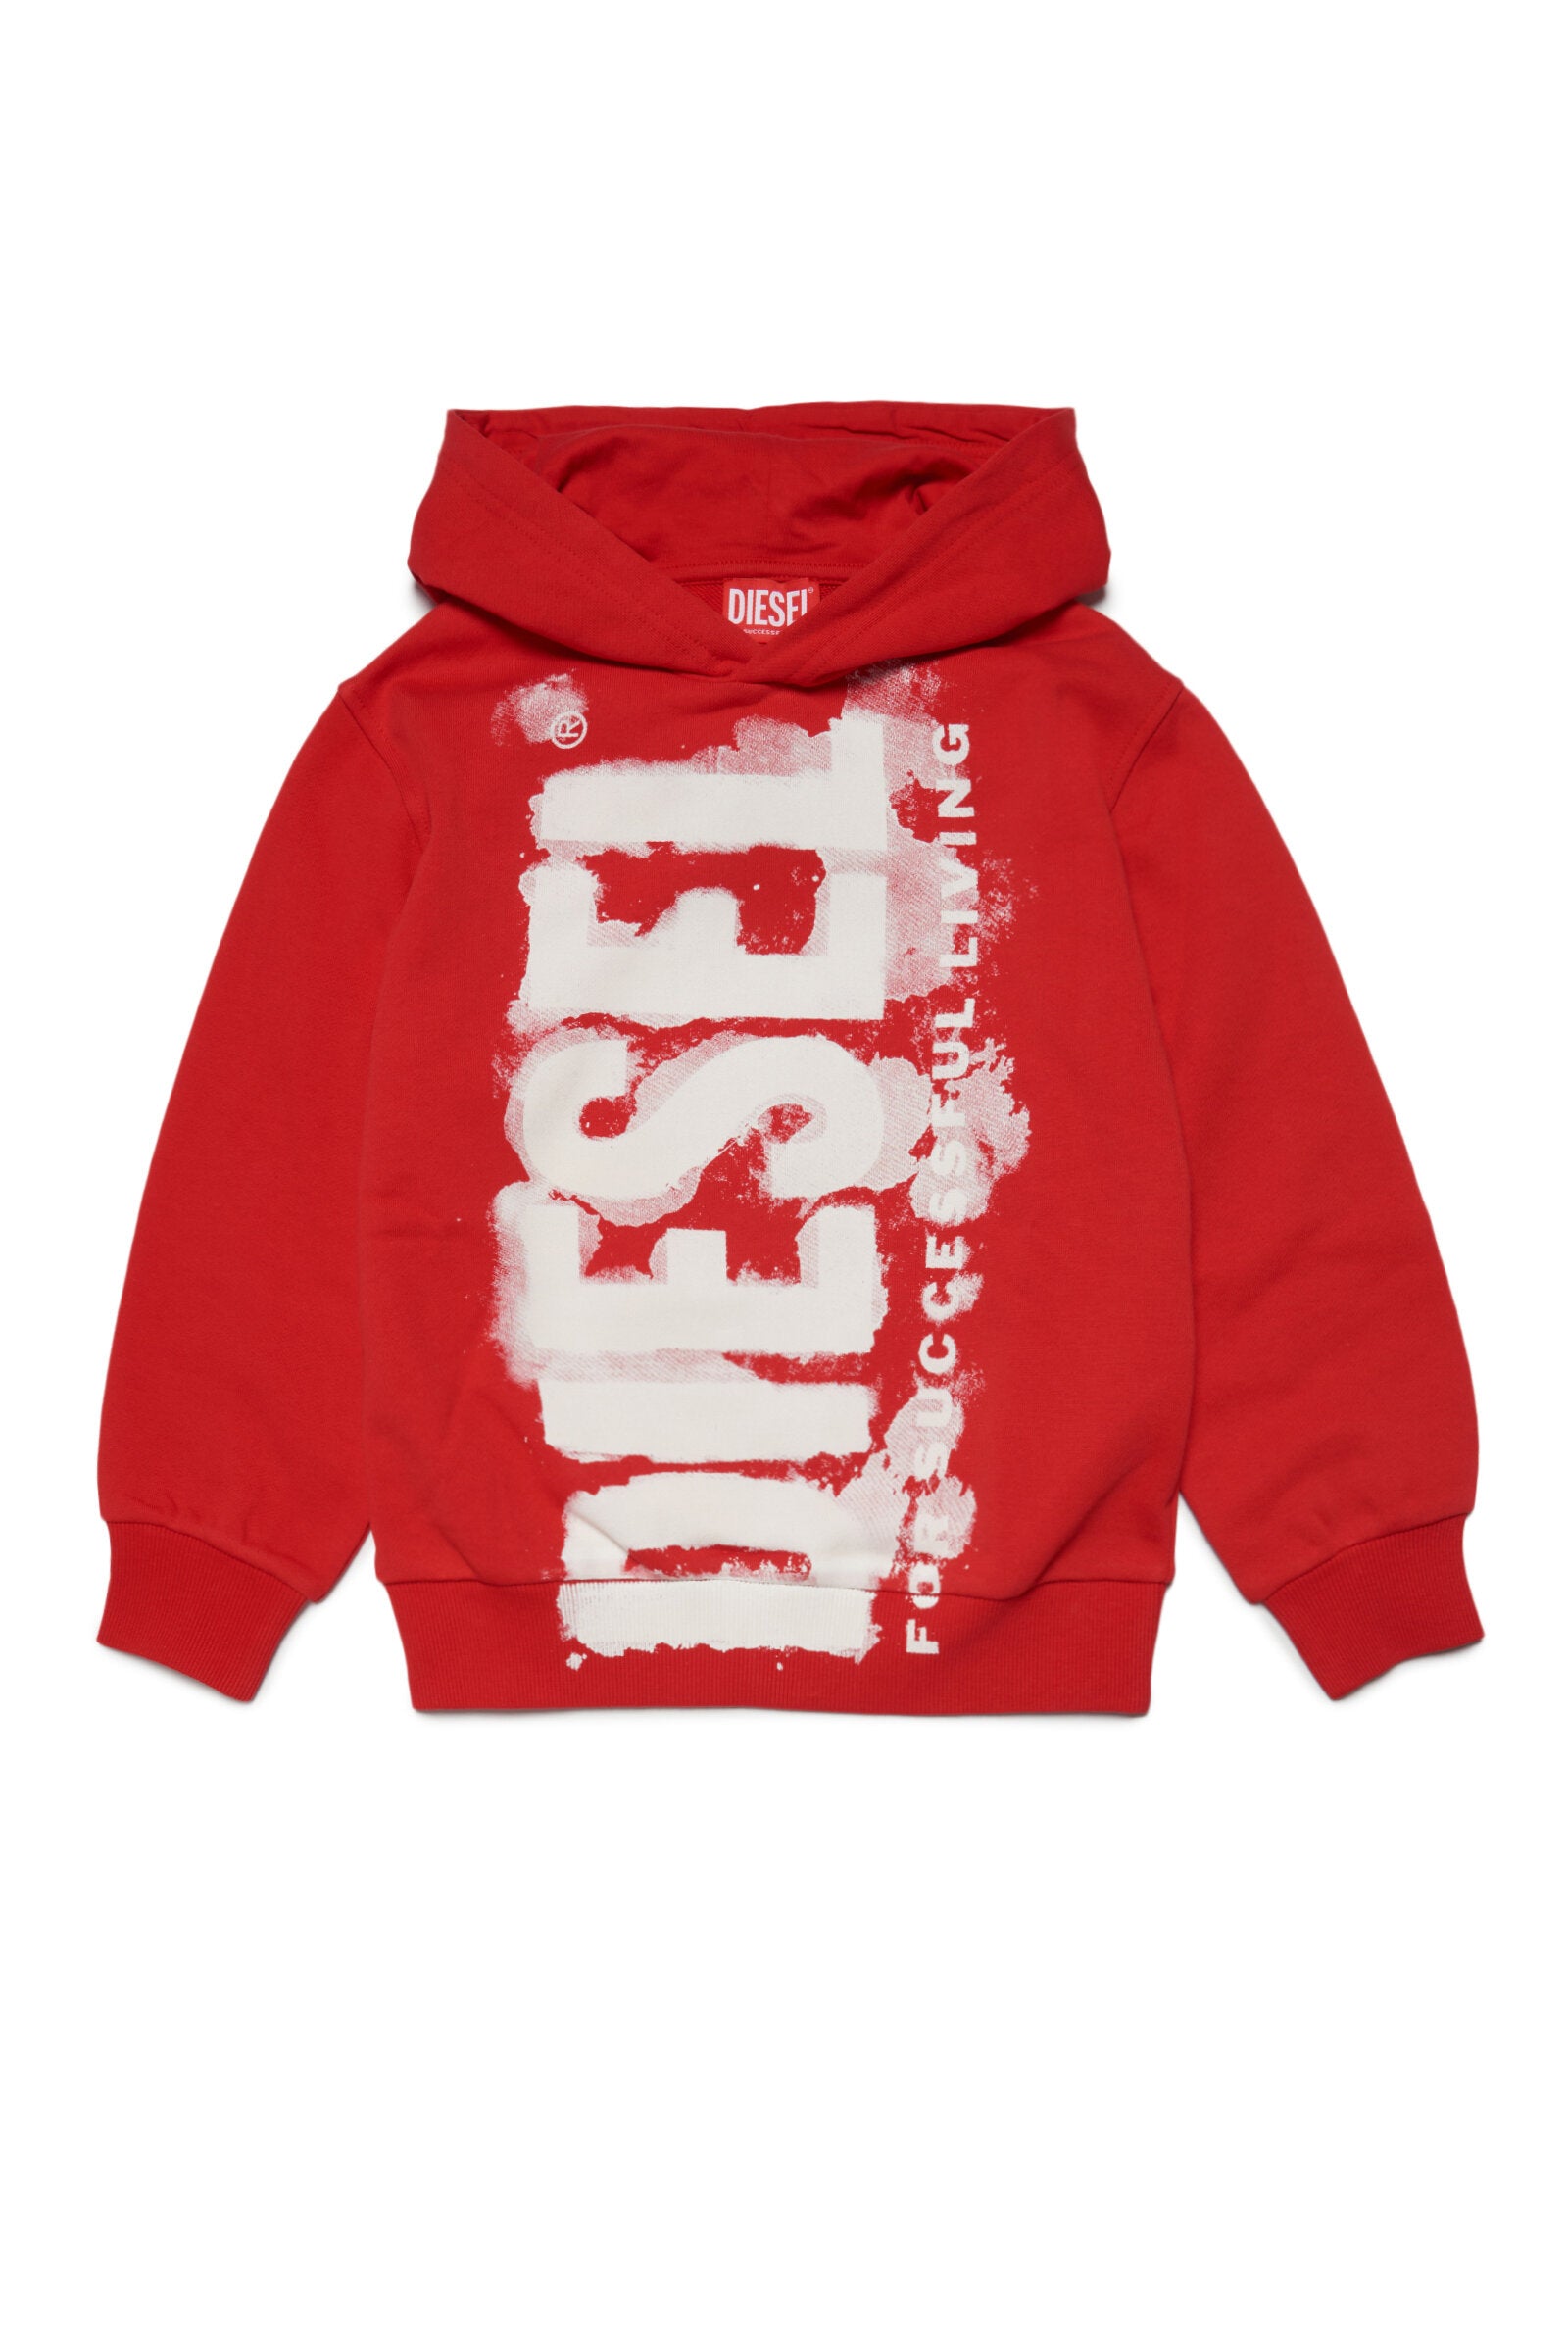 Diesel with red logo Kid | watercolour for children Brave sweatshirt effect hooded